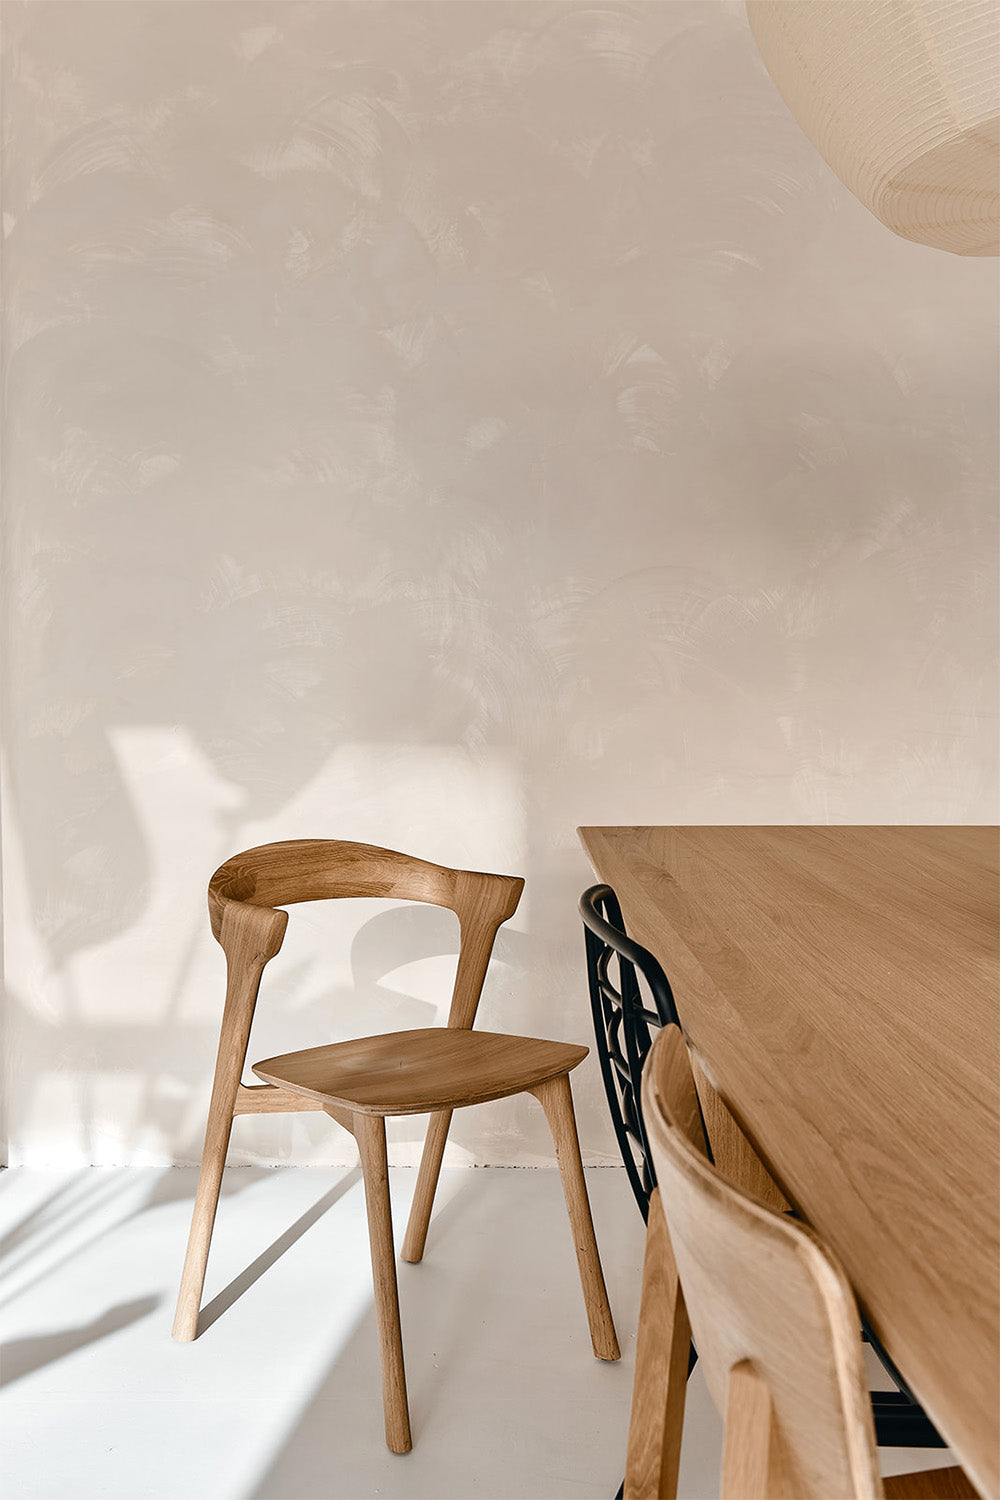 LAB ECO Chalk Frosted Sand no. 374 - Hoe breng je kalkverf aan - Foto @atelieroost.amsterdam